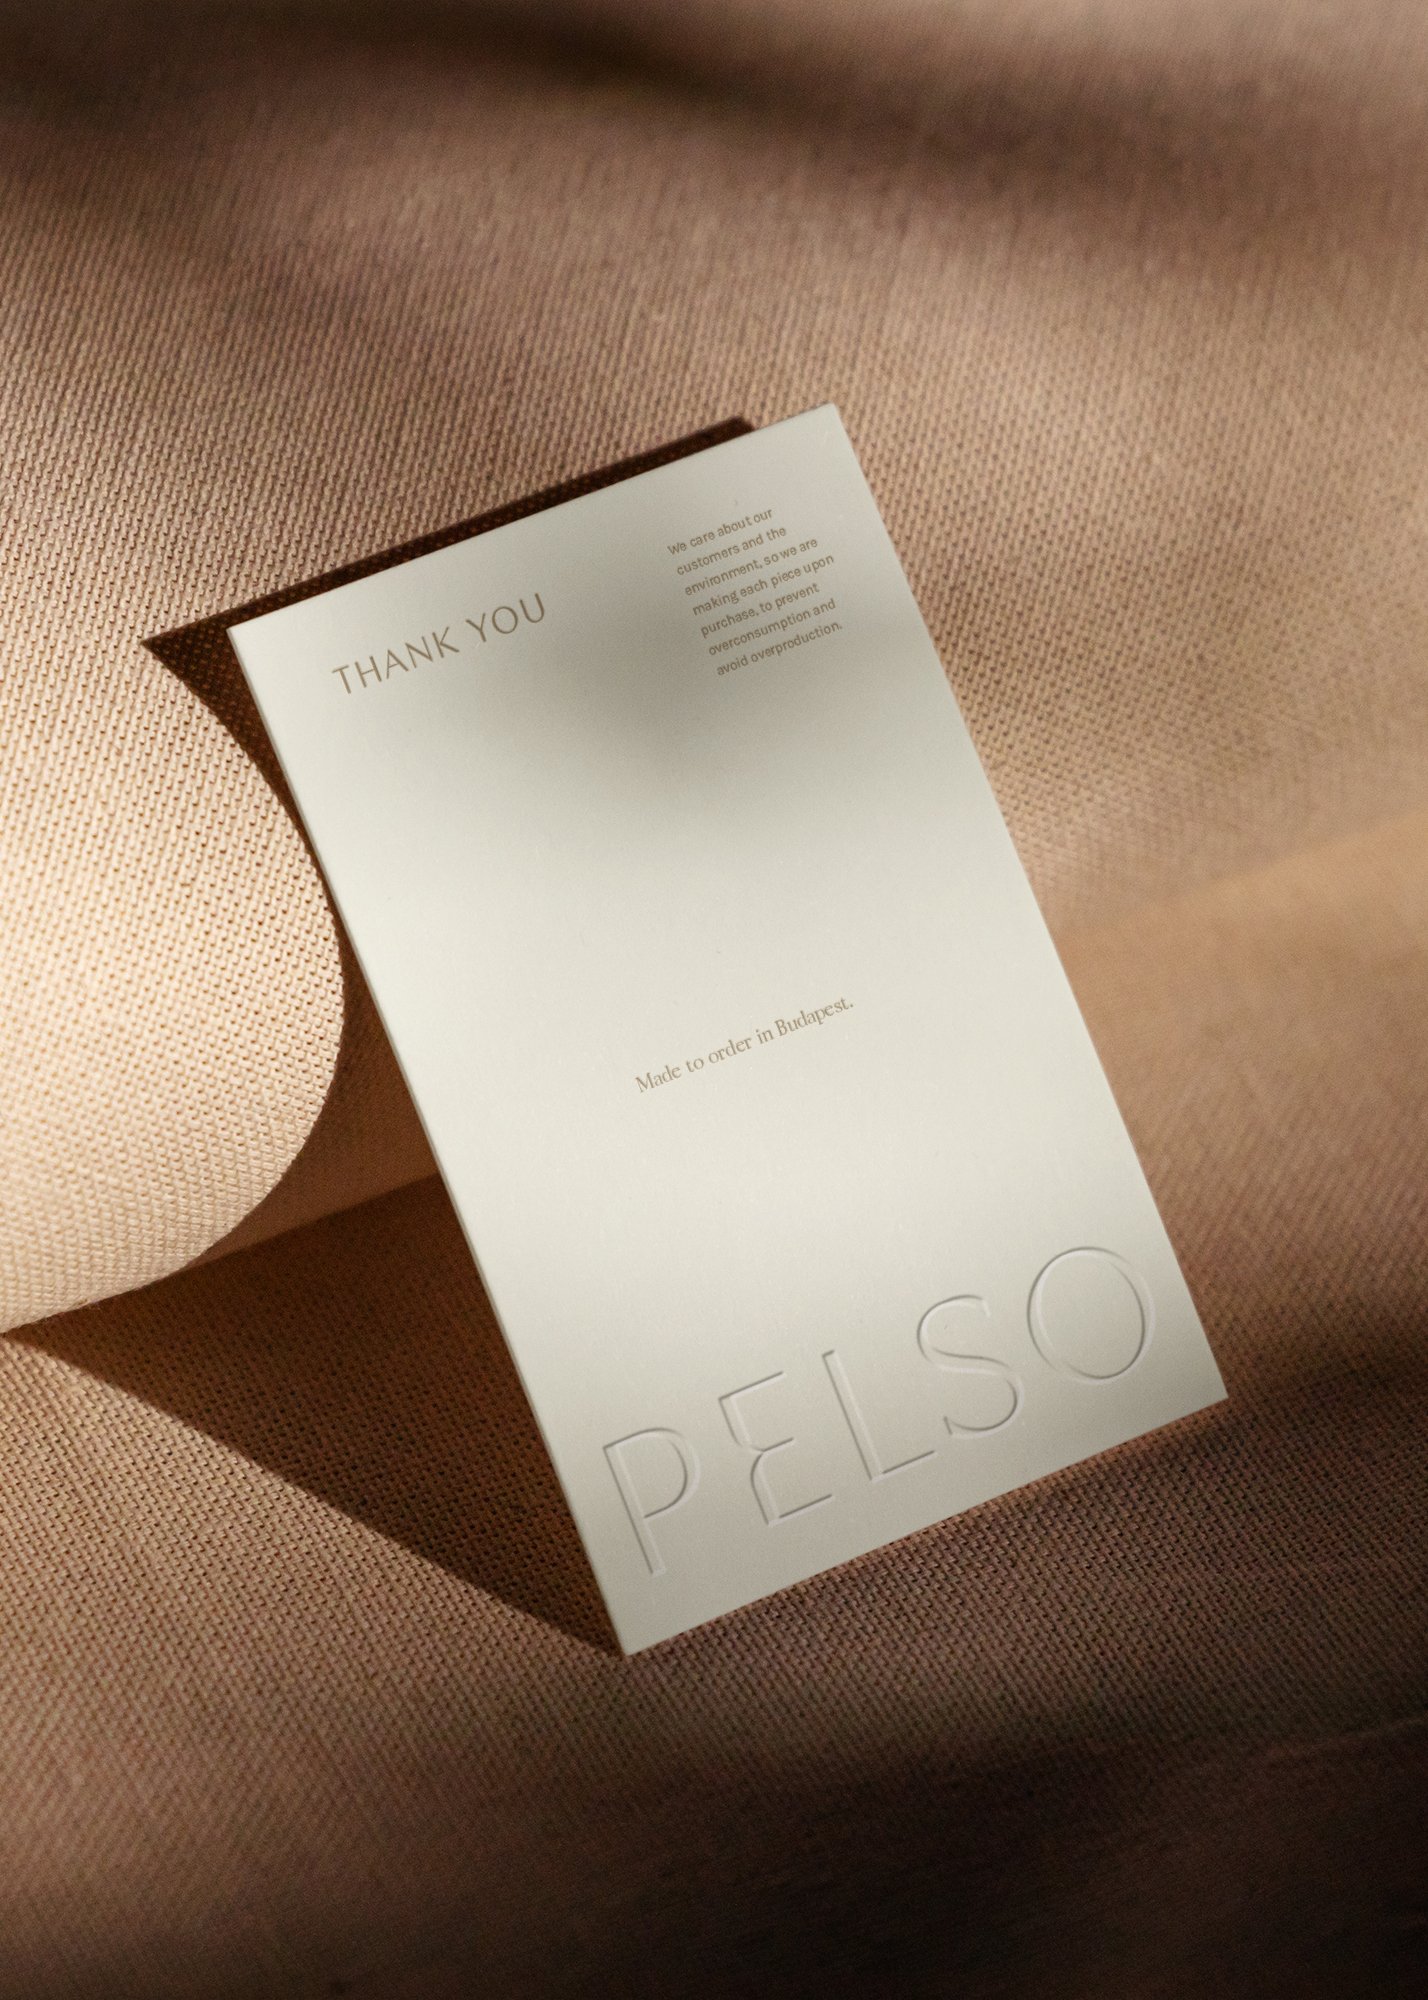 Pelso_thank-you-note.jpg